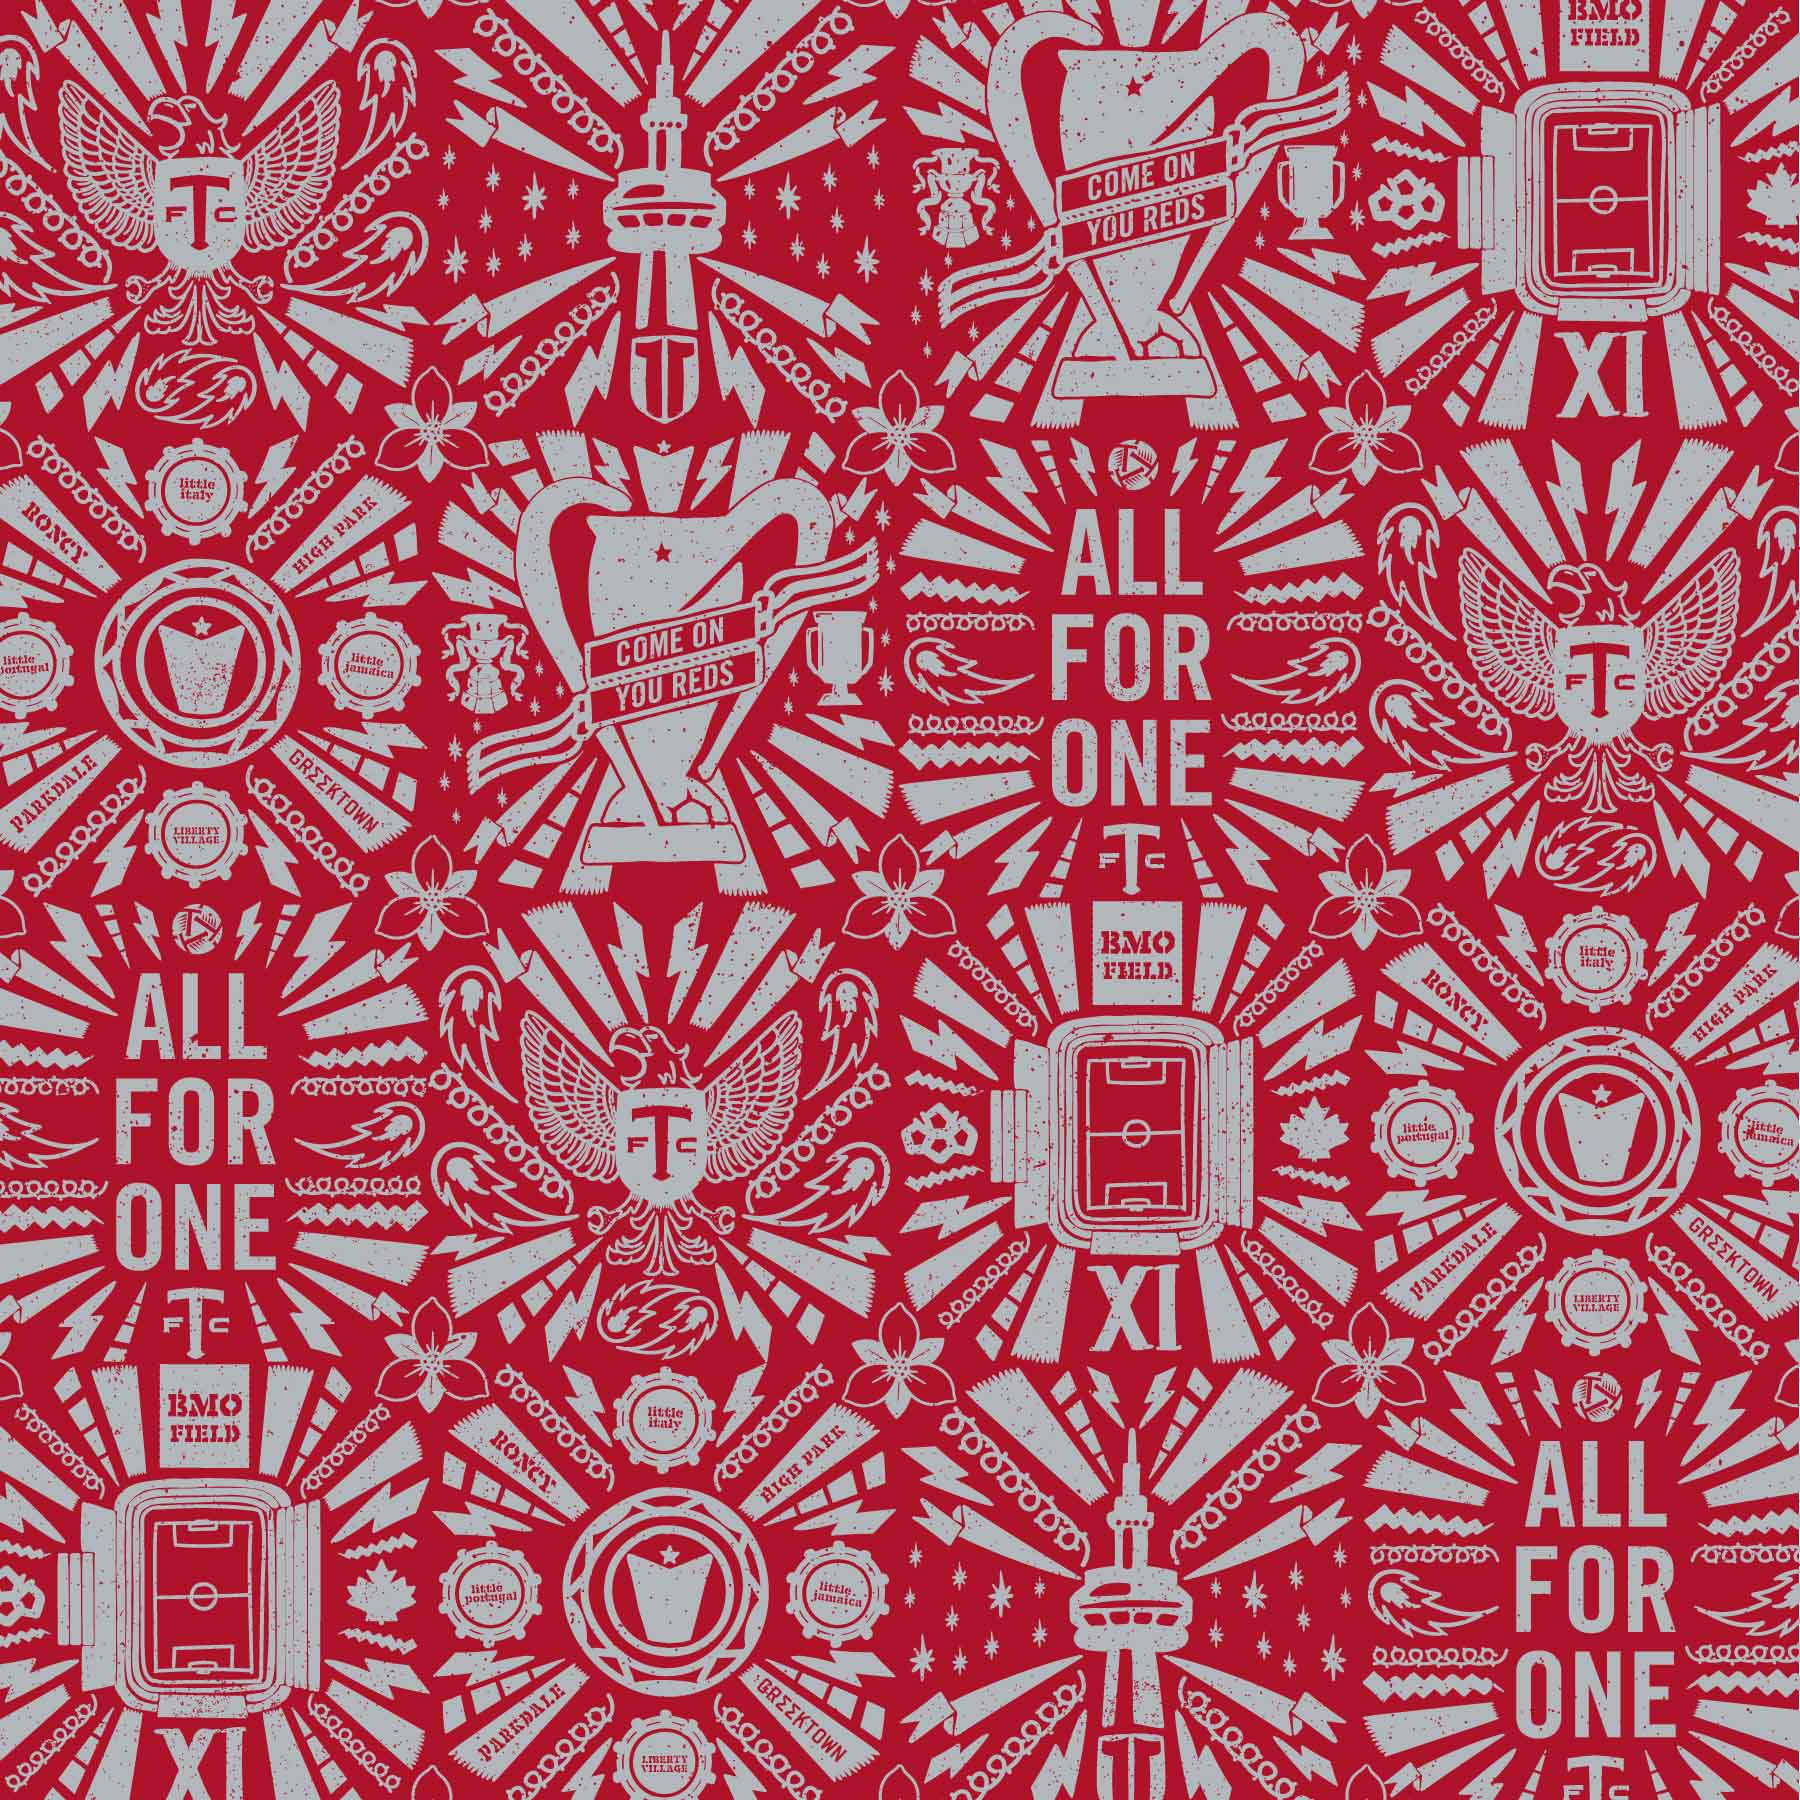 Toronto FC All For One Poster Wallpaper